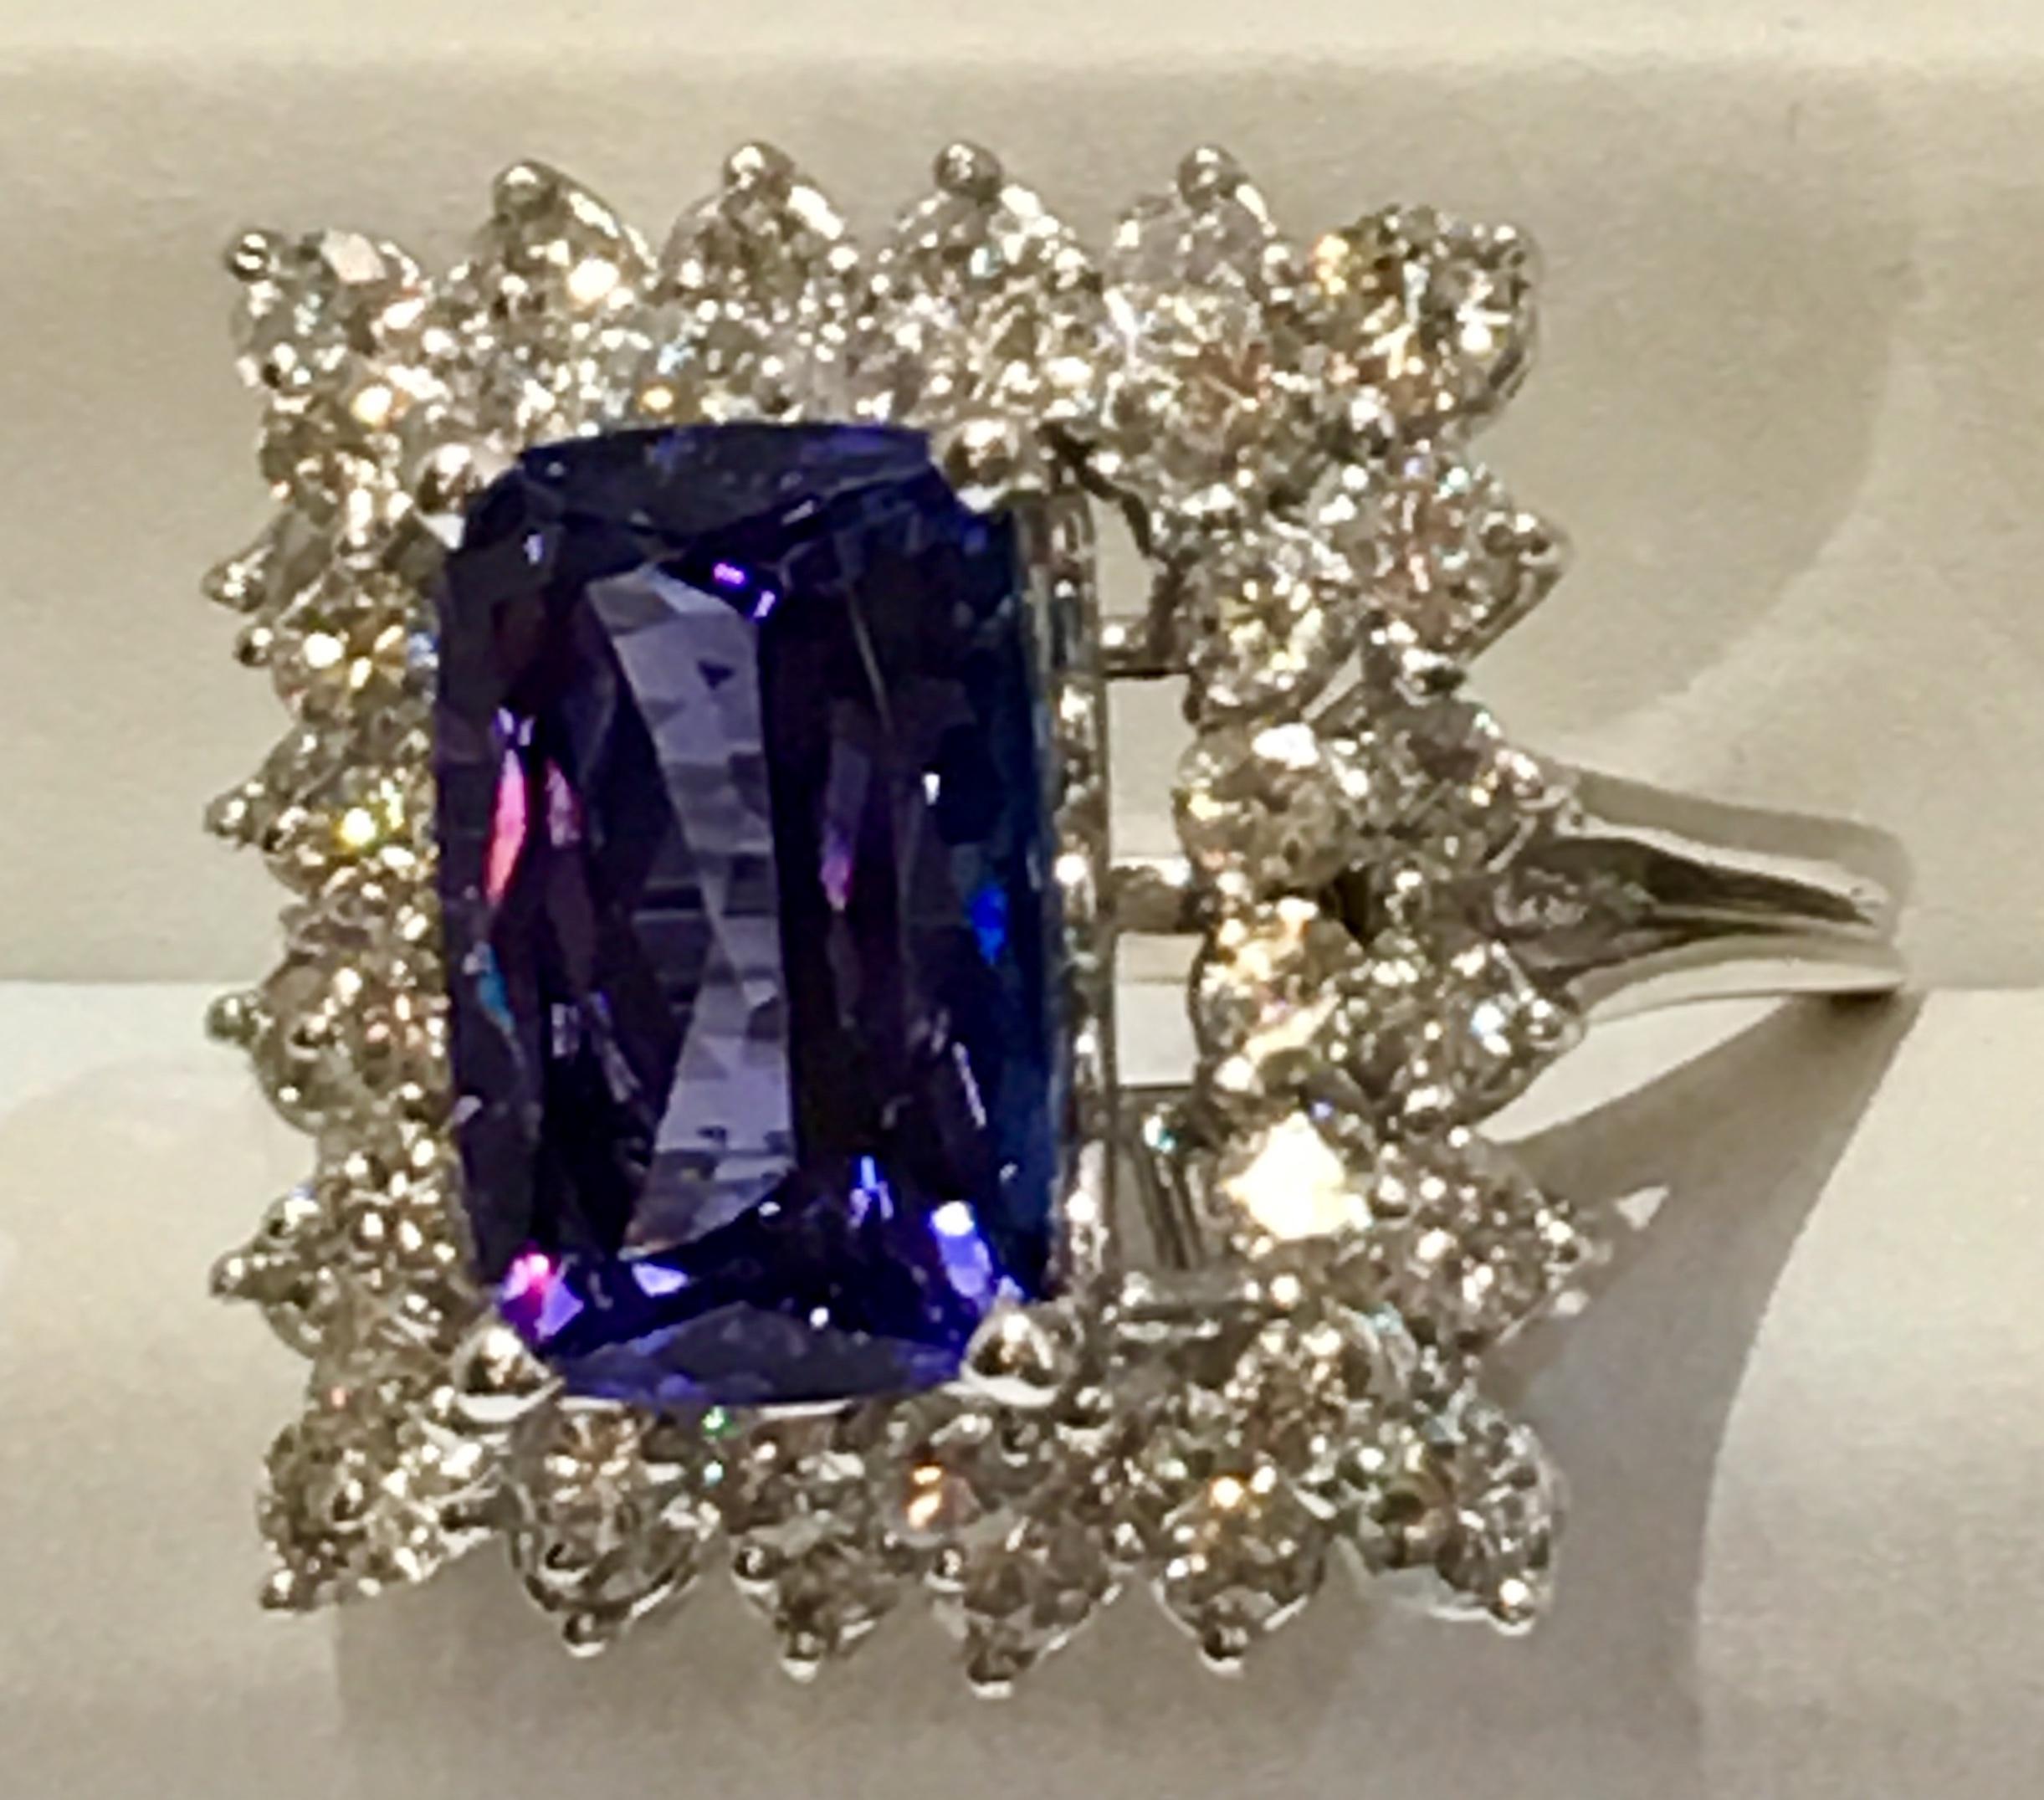 Contemporary Showy 10.5 Carat Vivid Tanzanite Double Diamond Halo White Gold Cocktail Ring For Sale